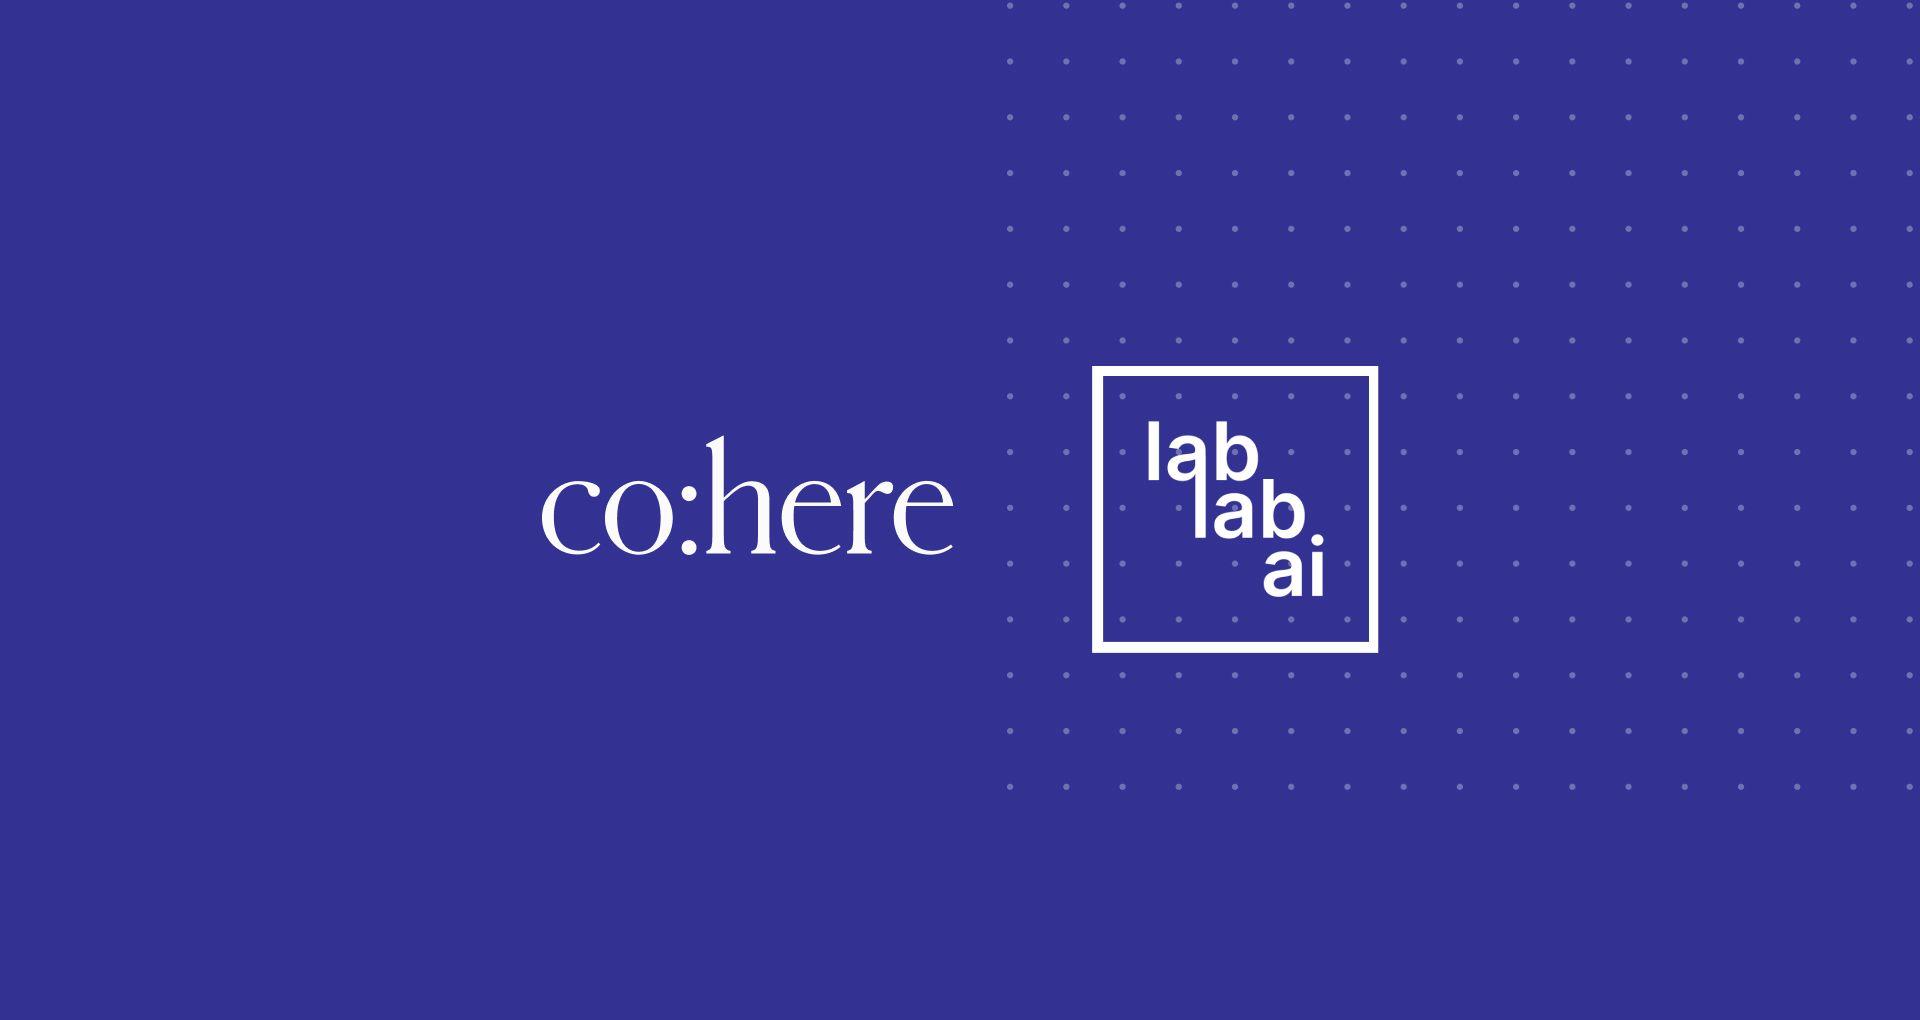 Cohere Partners with lablab.ai to Host Three Online Hackathons